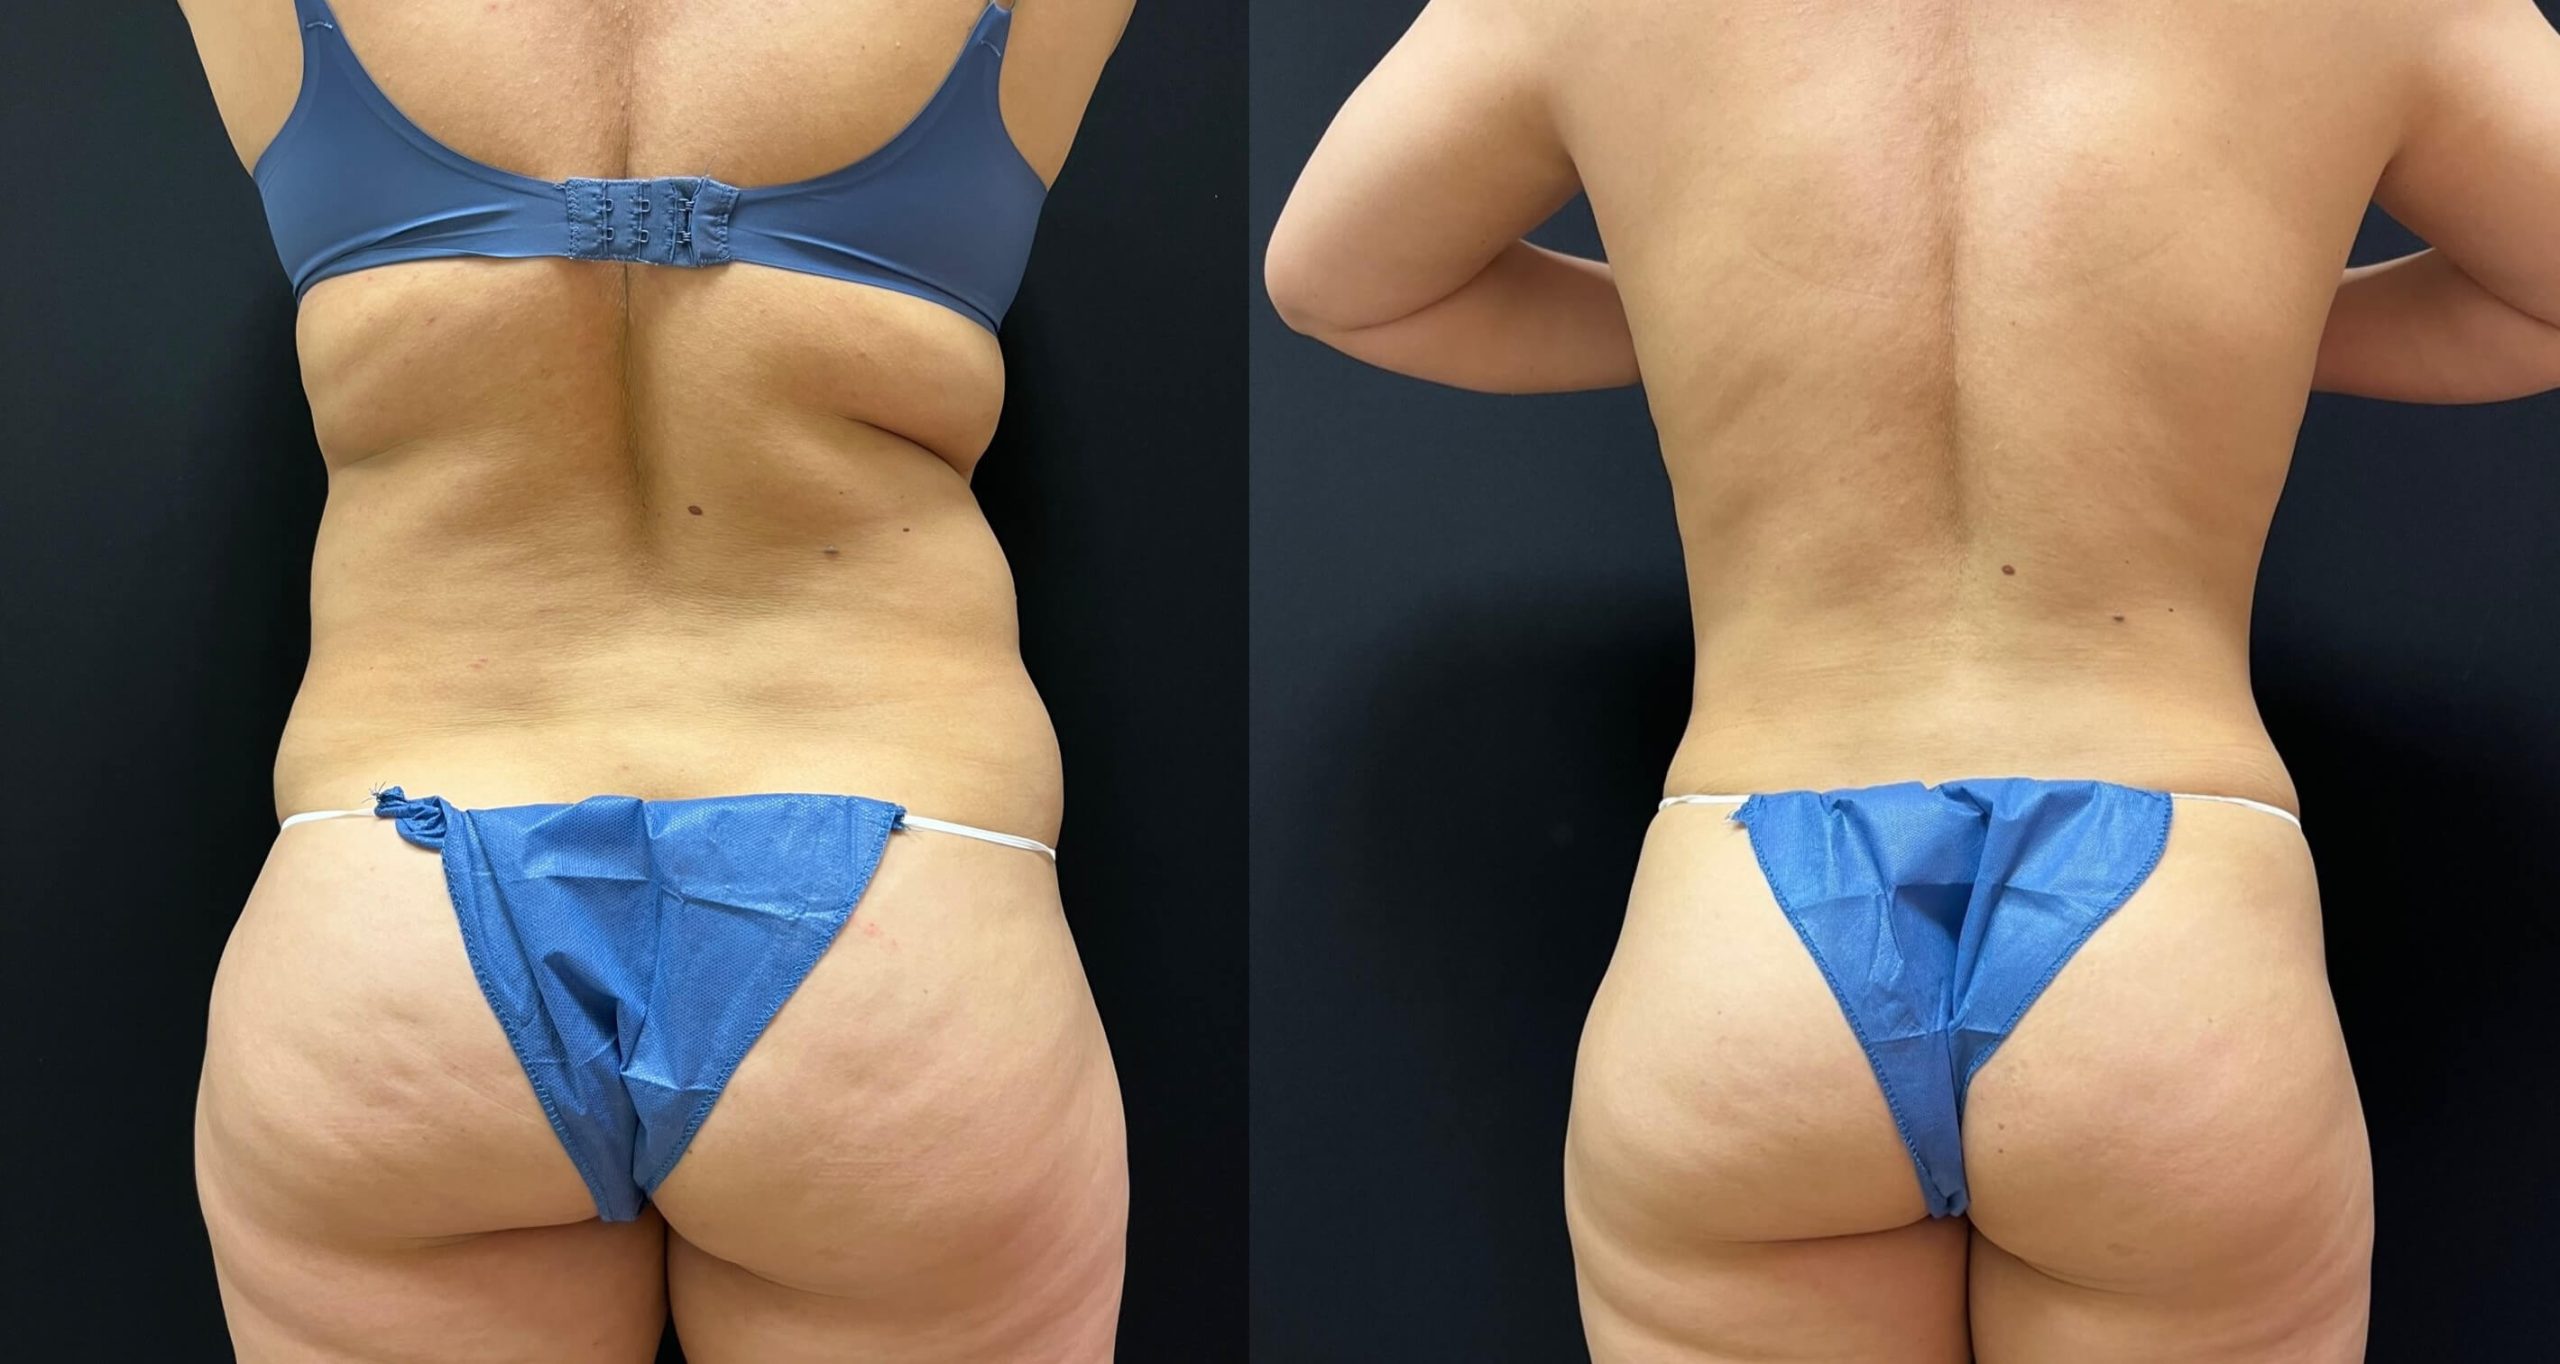 Smartlipo patient before & after results.